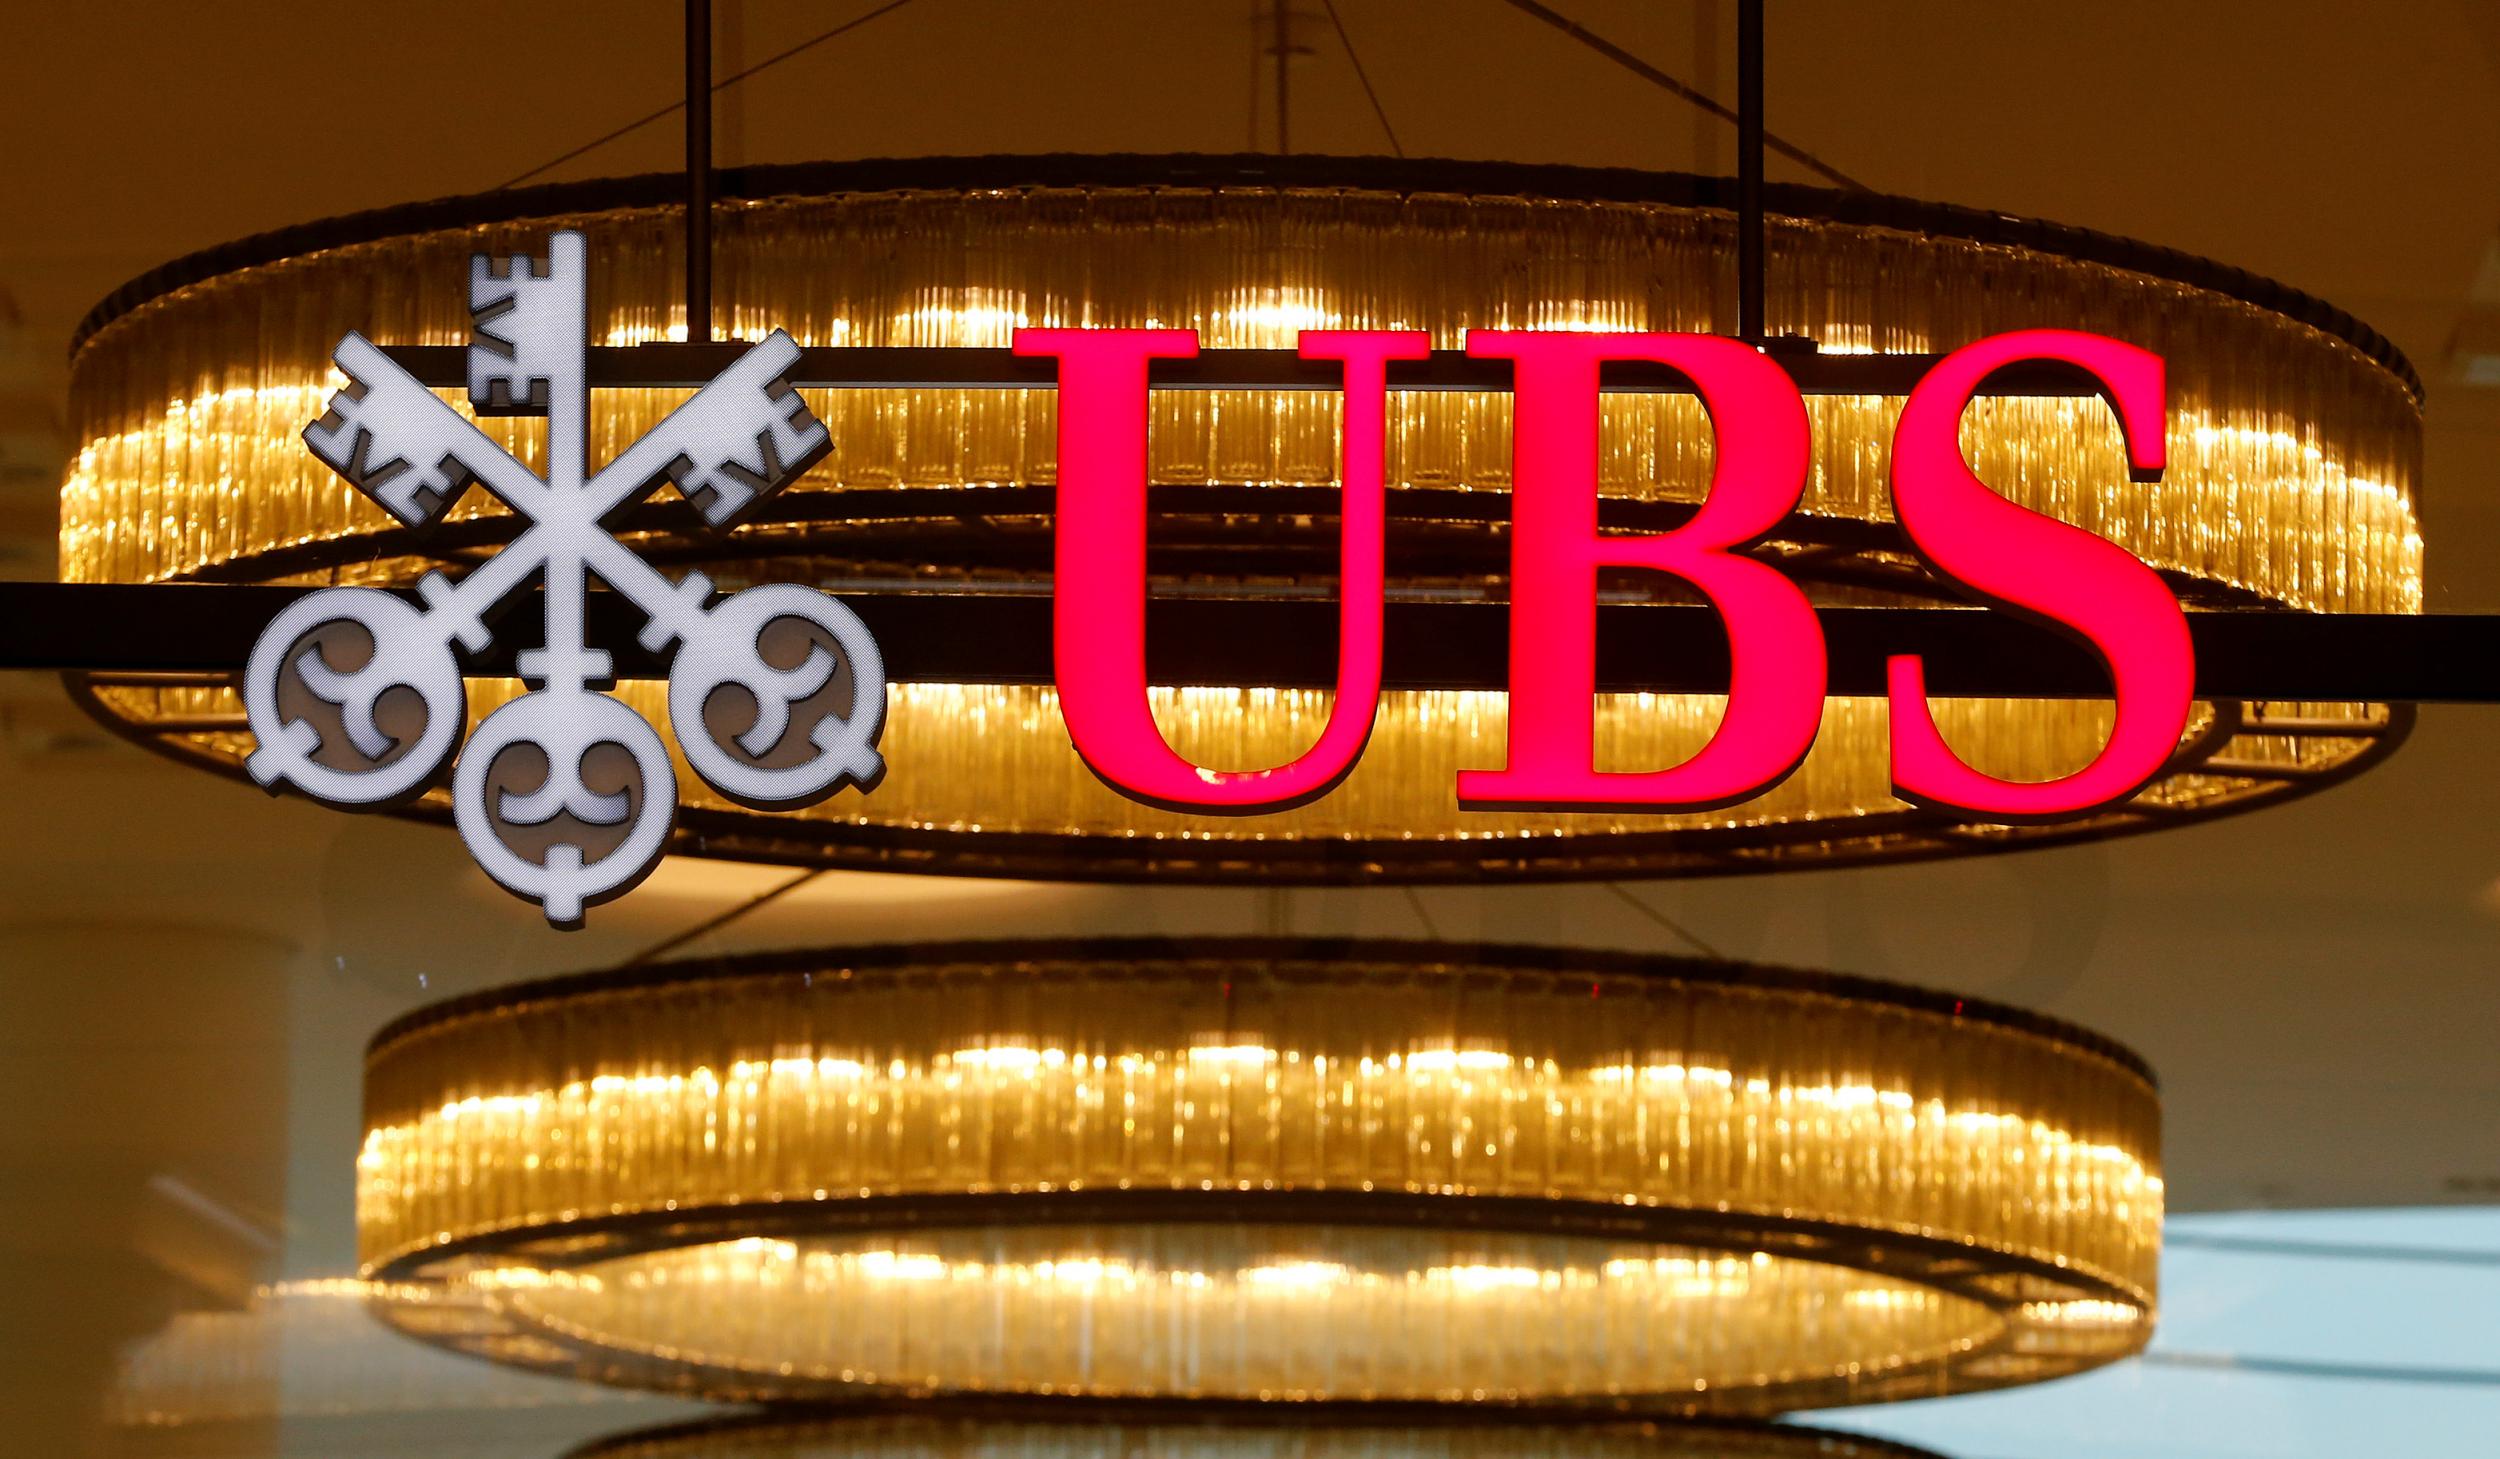 UBS currently employs around 5,000 people in London